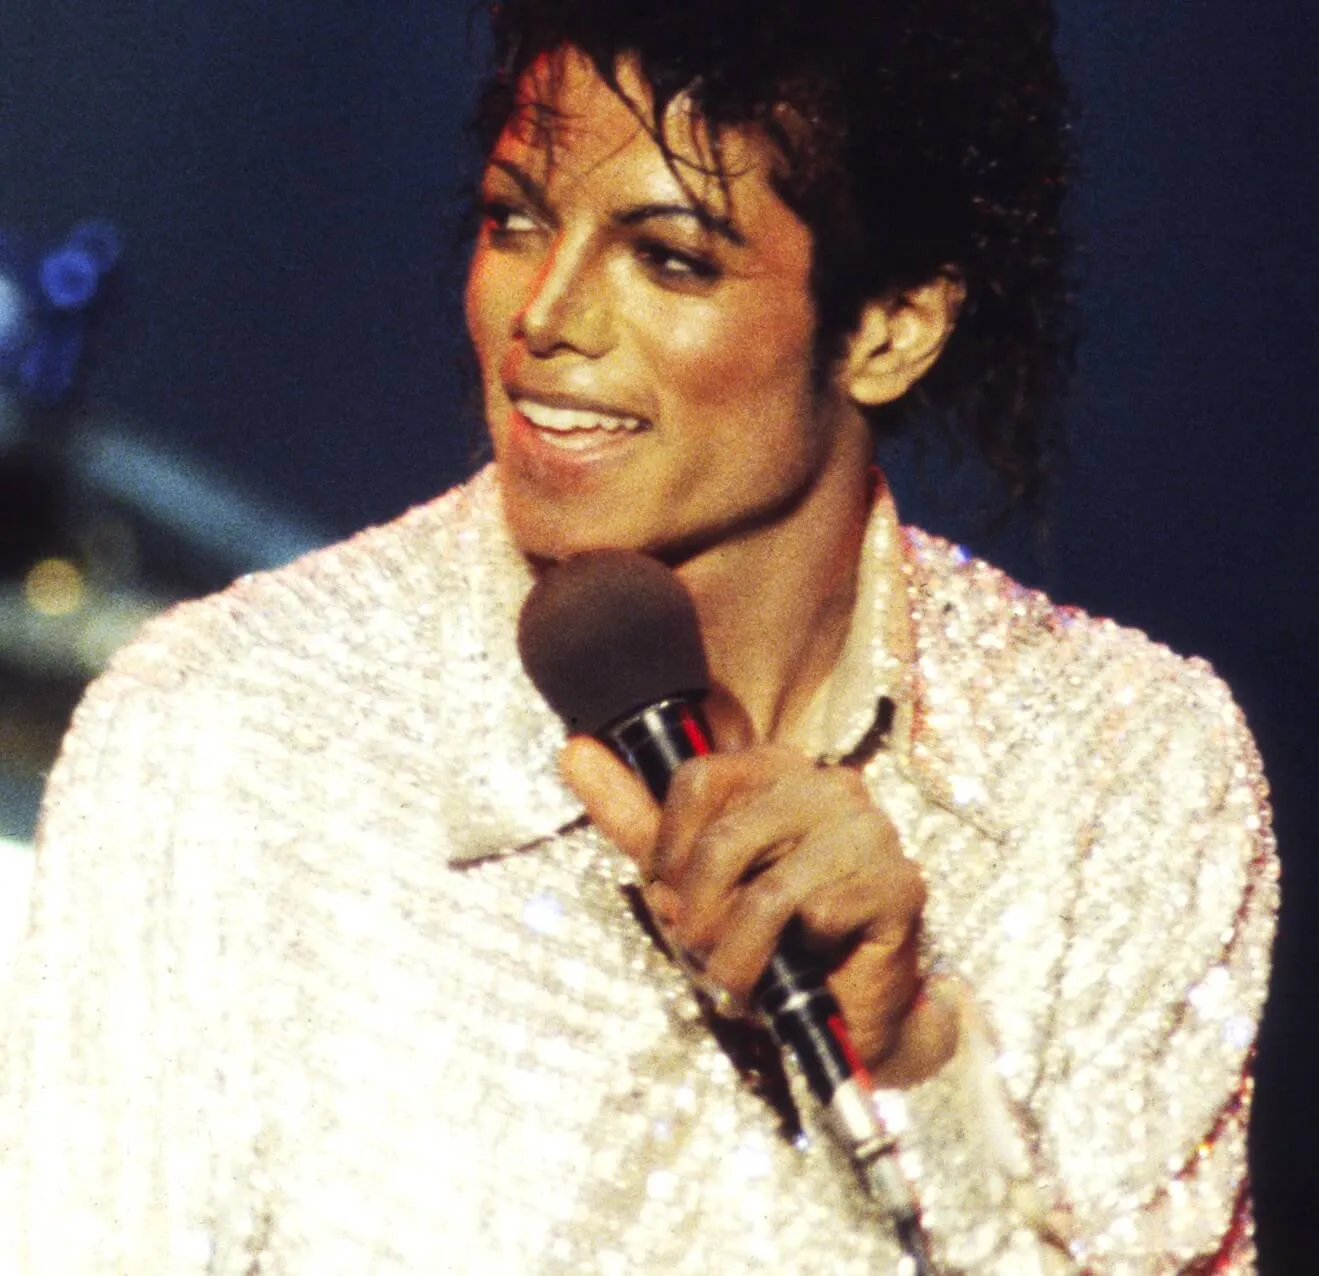 'Off the Wall' star Michael Jackson with a microphone